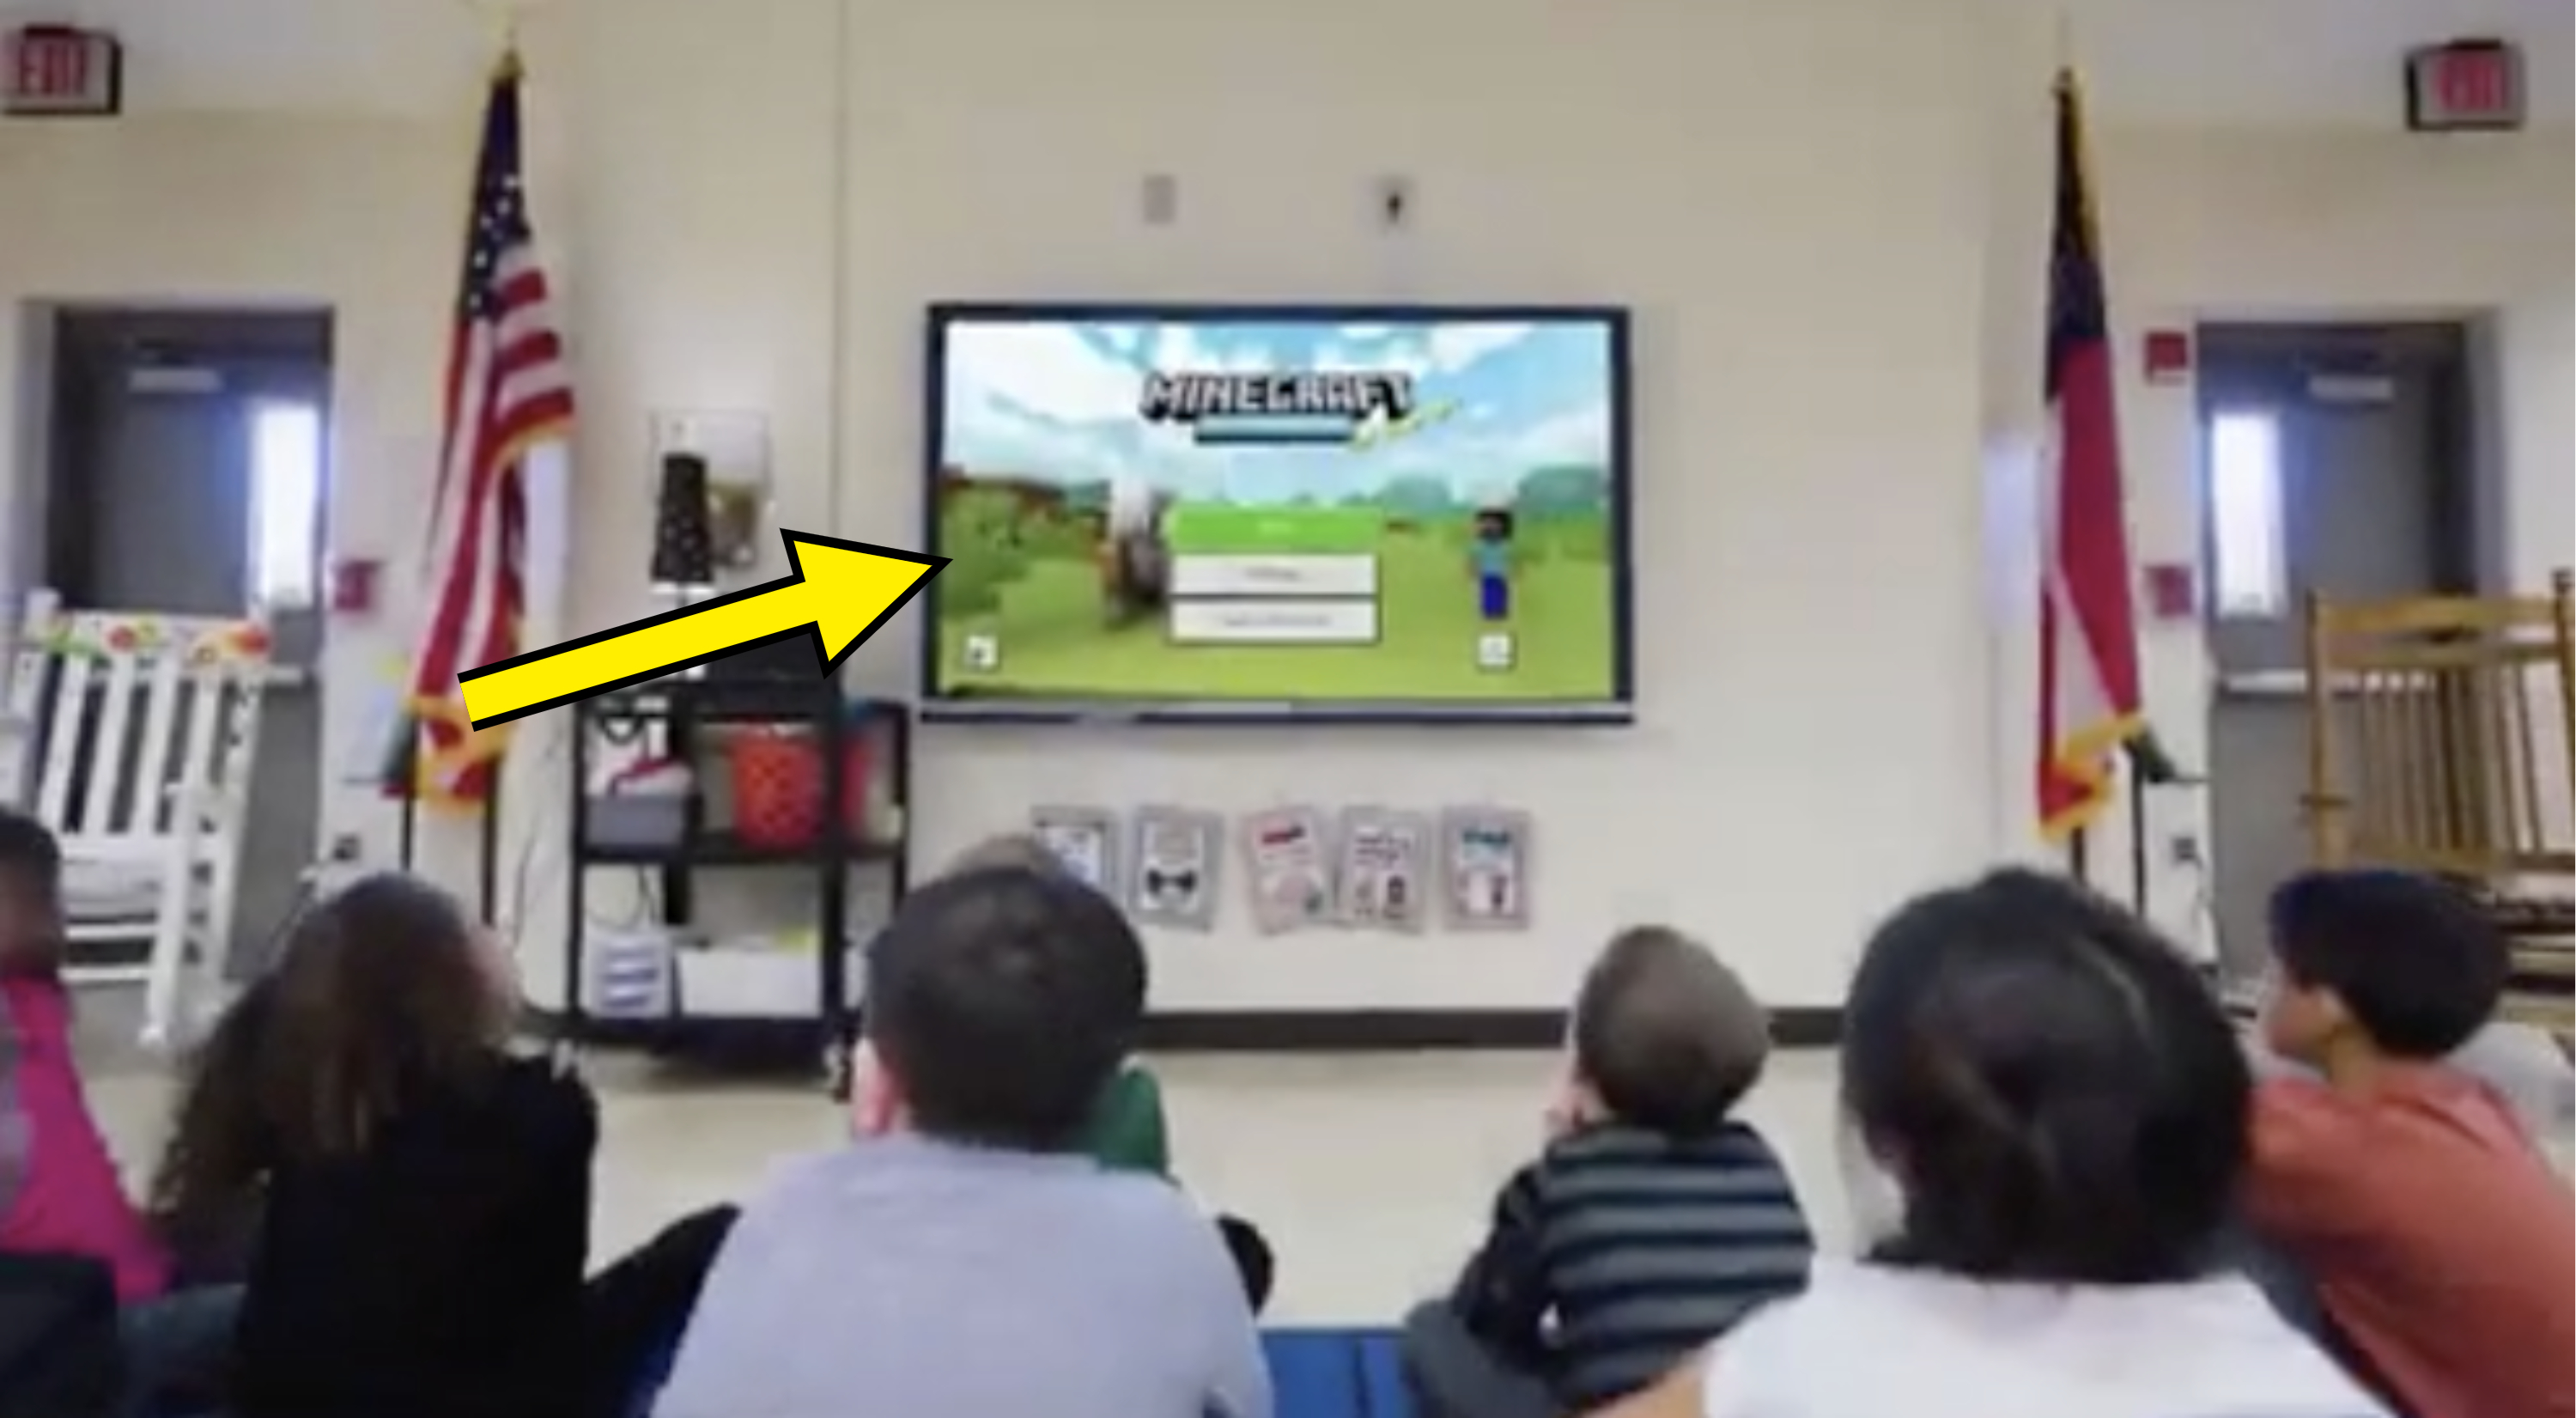 People at a seminar with a Minecraft presentation on the screen, indicating gaming in education or work